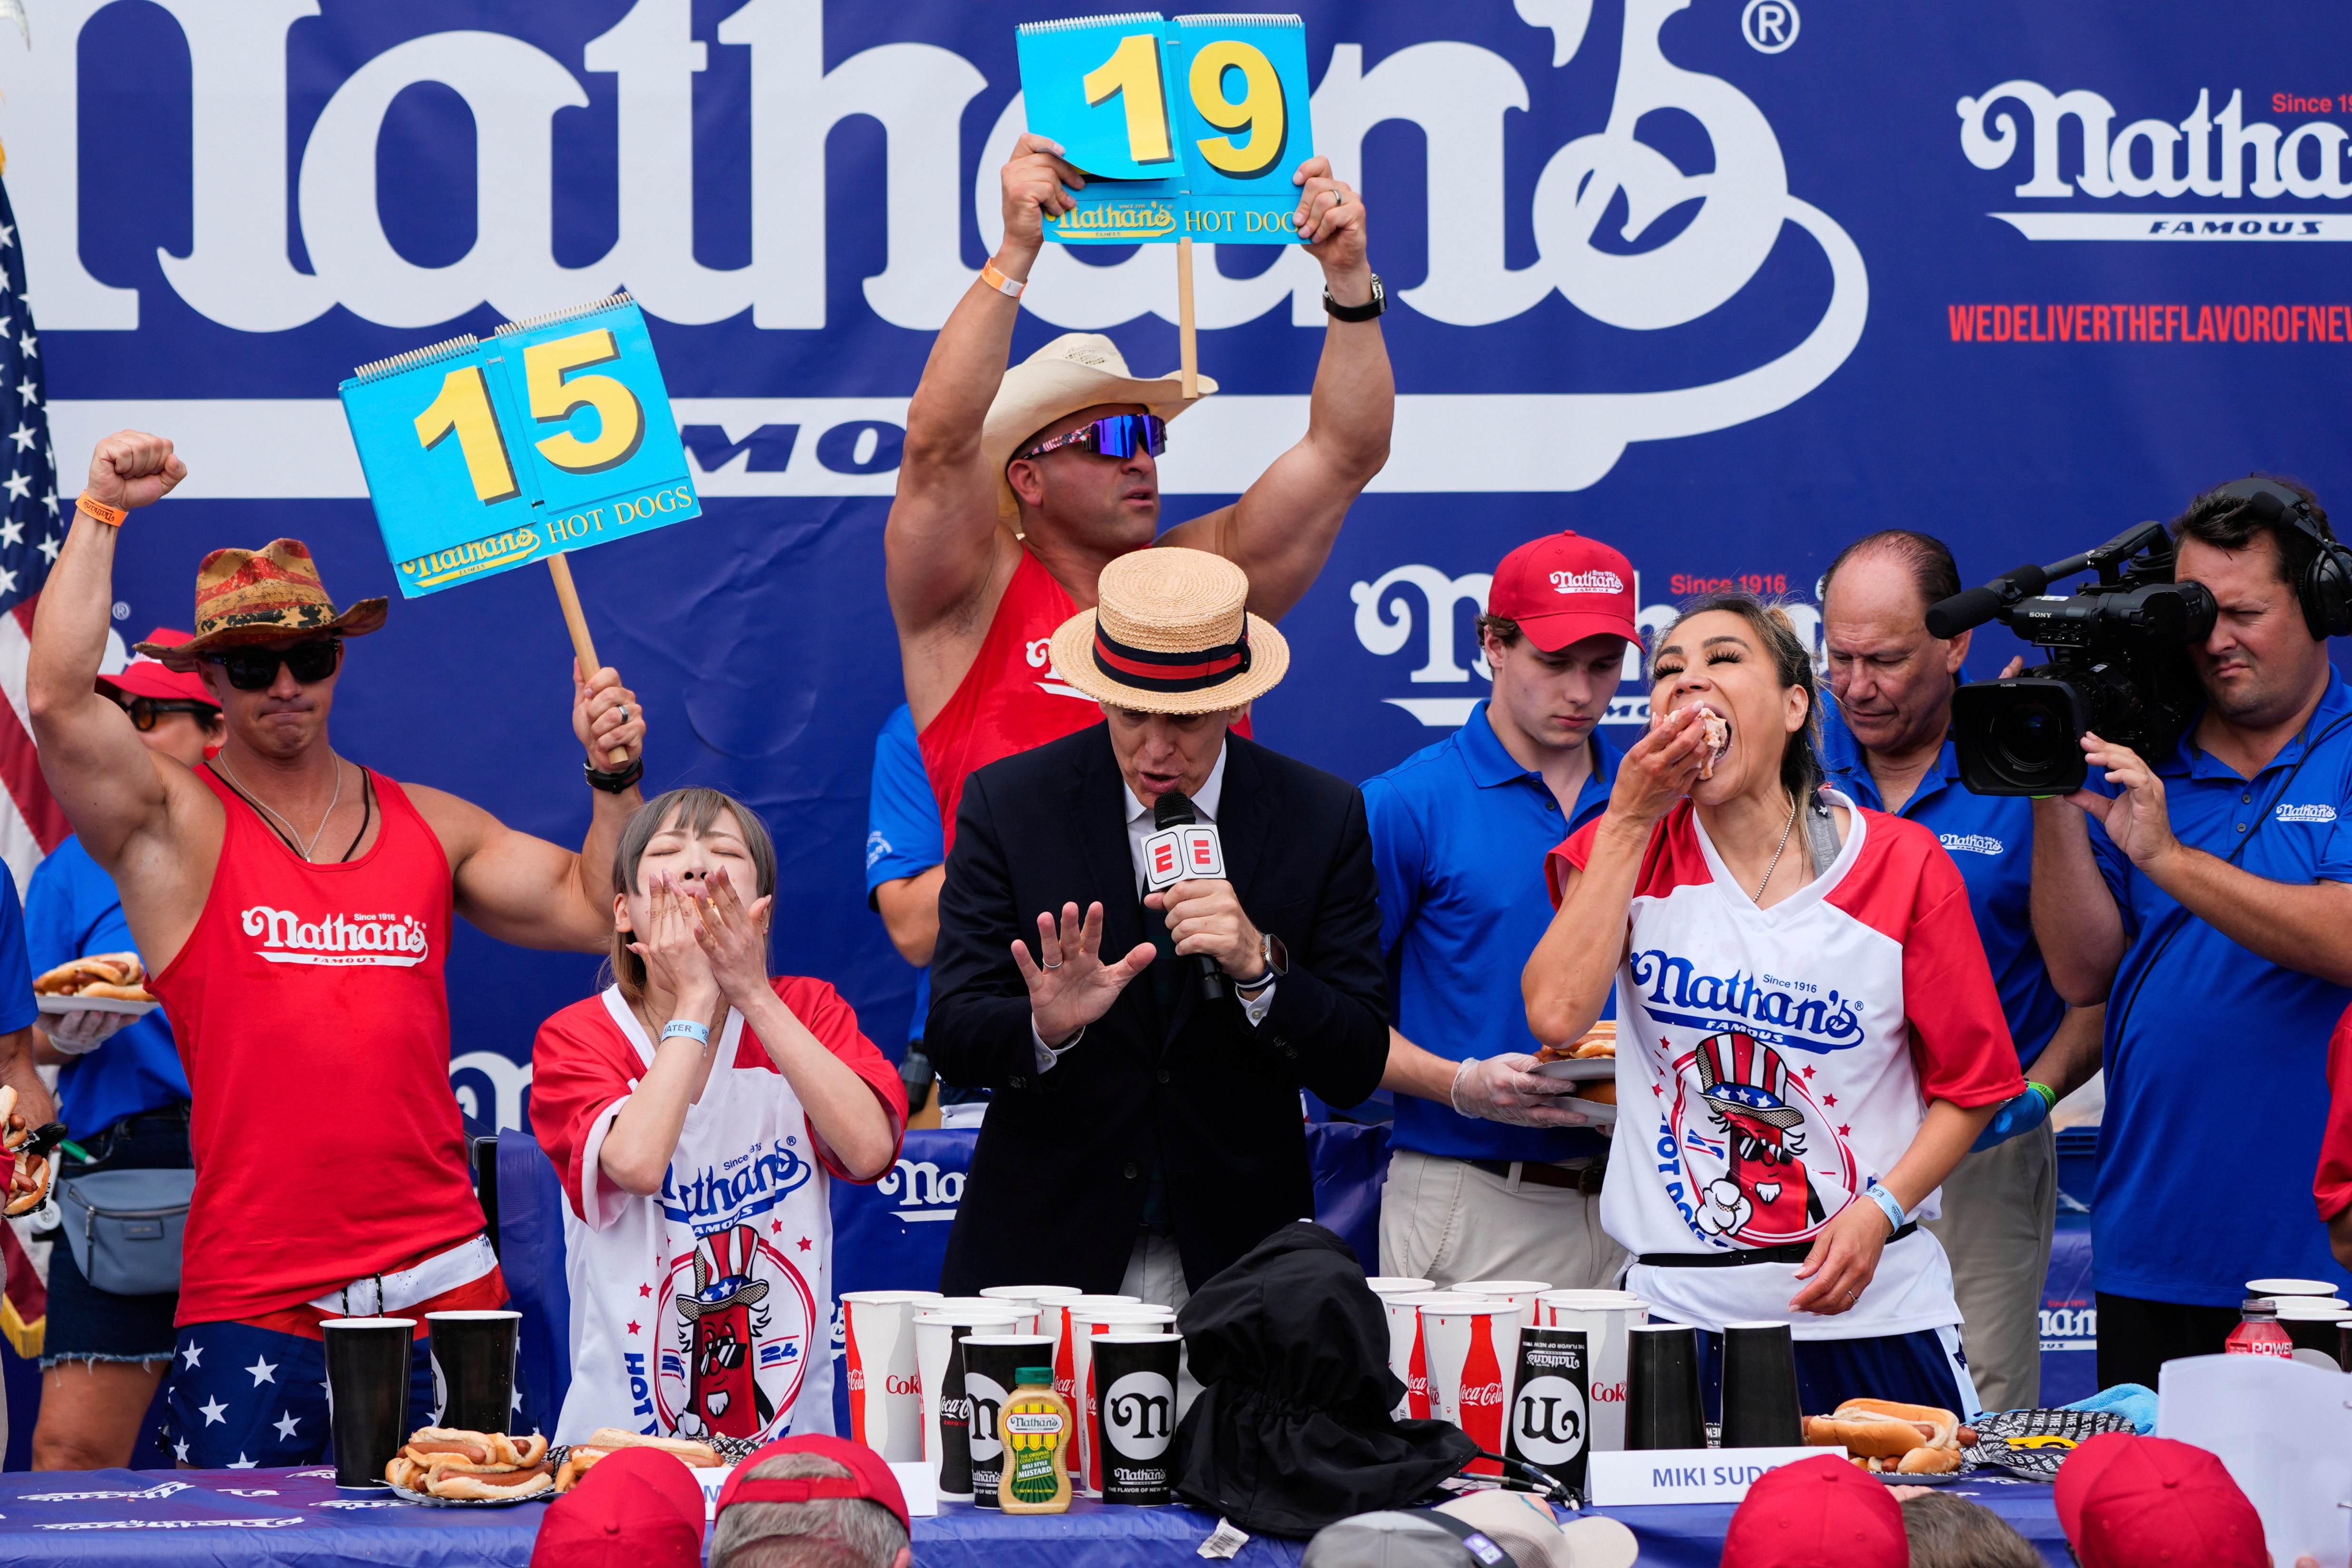 This was the first time in 16 years that someone other than Joey Chestnut has won the contest.